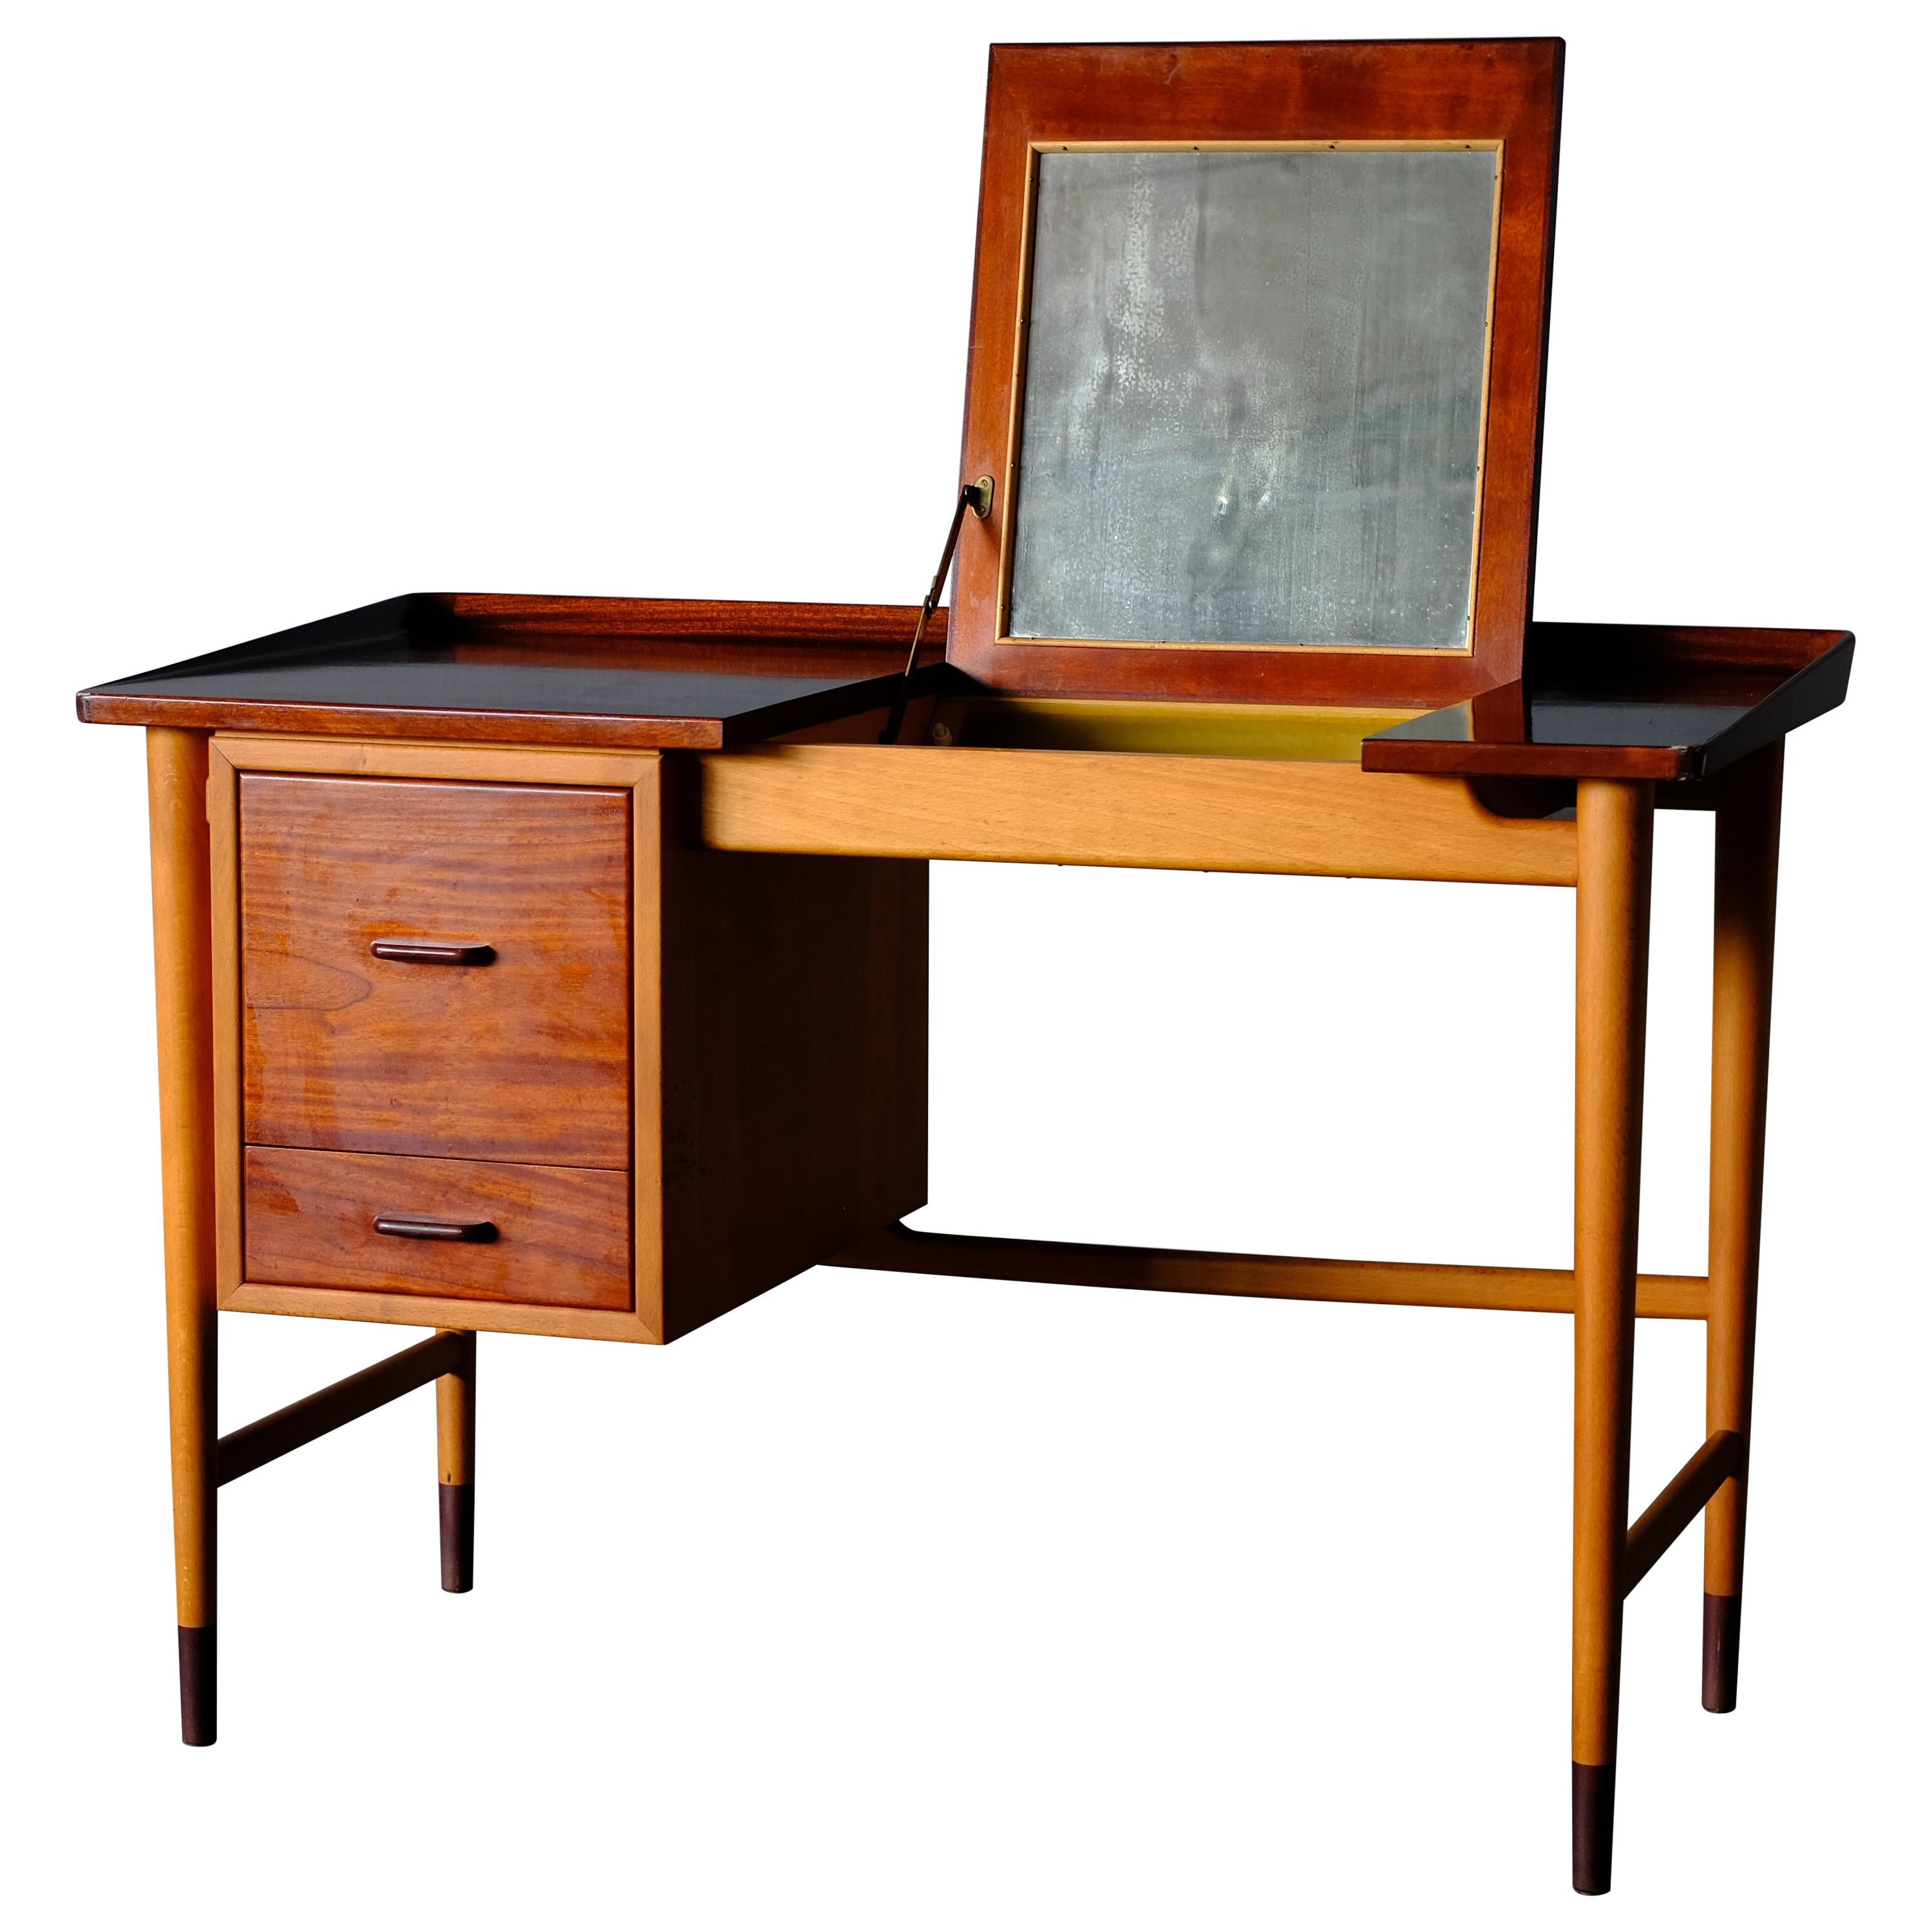 Niels Vodder, Beech and Mahogany Dressing Table